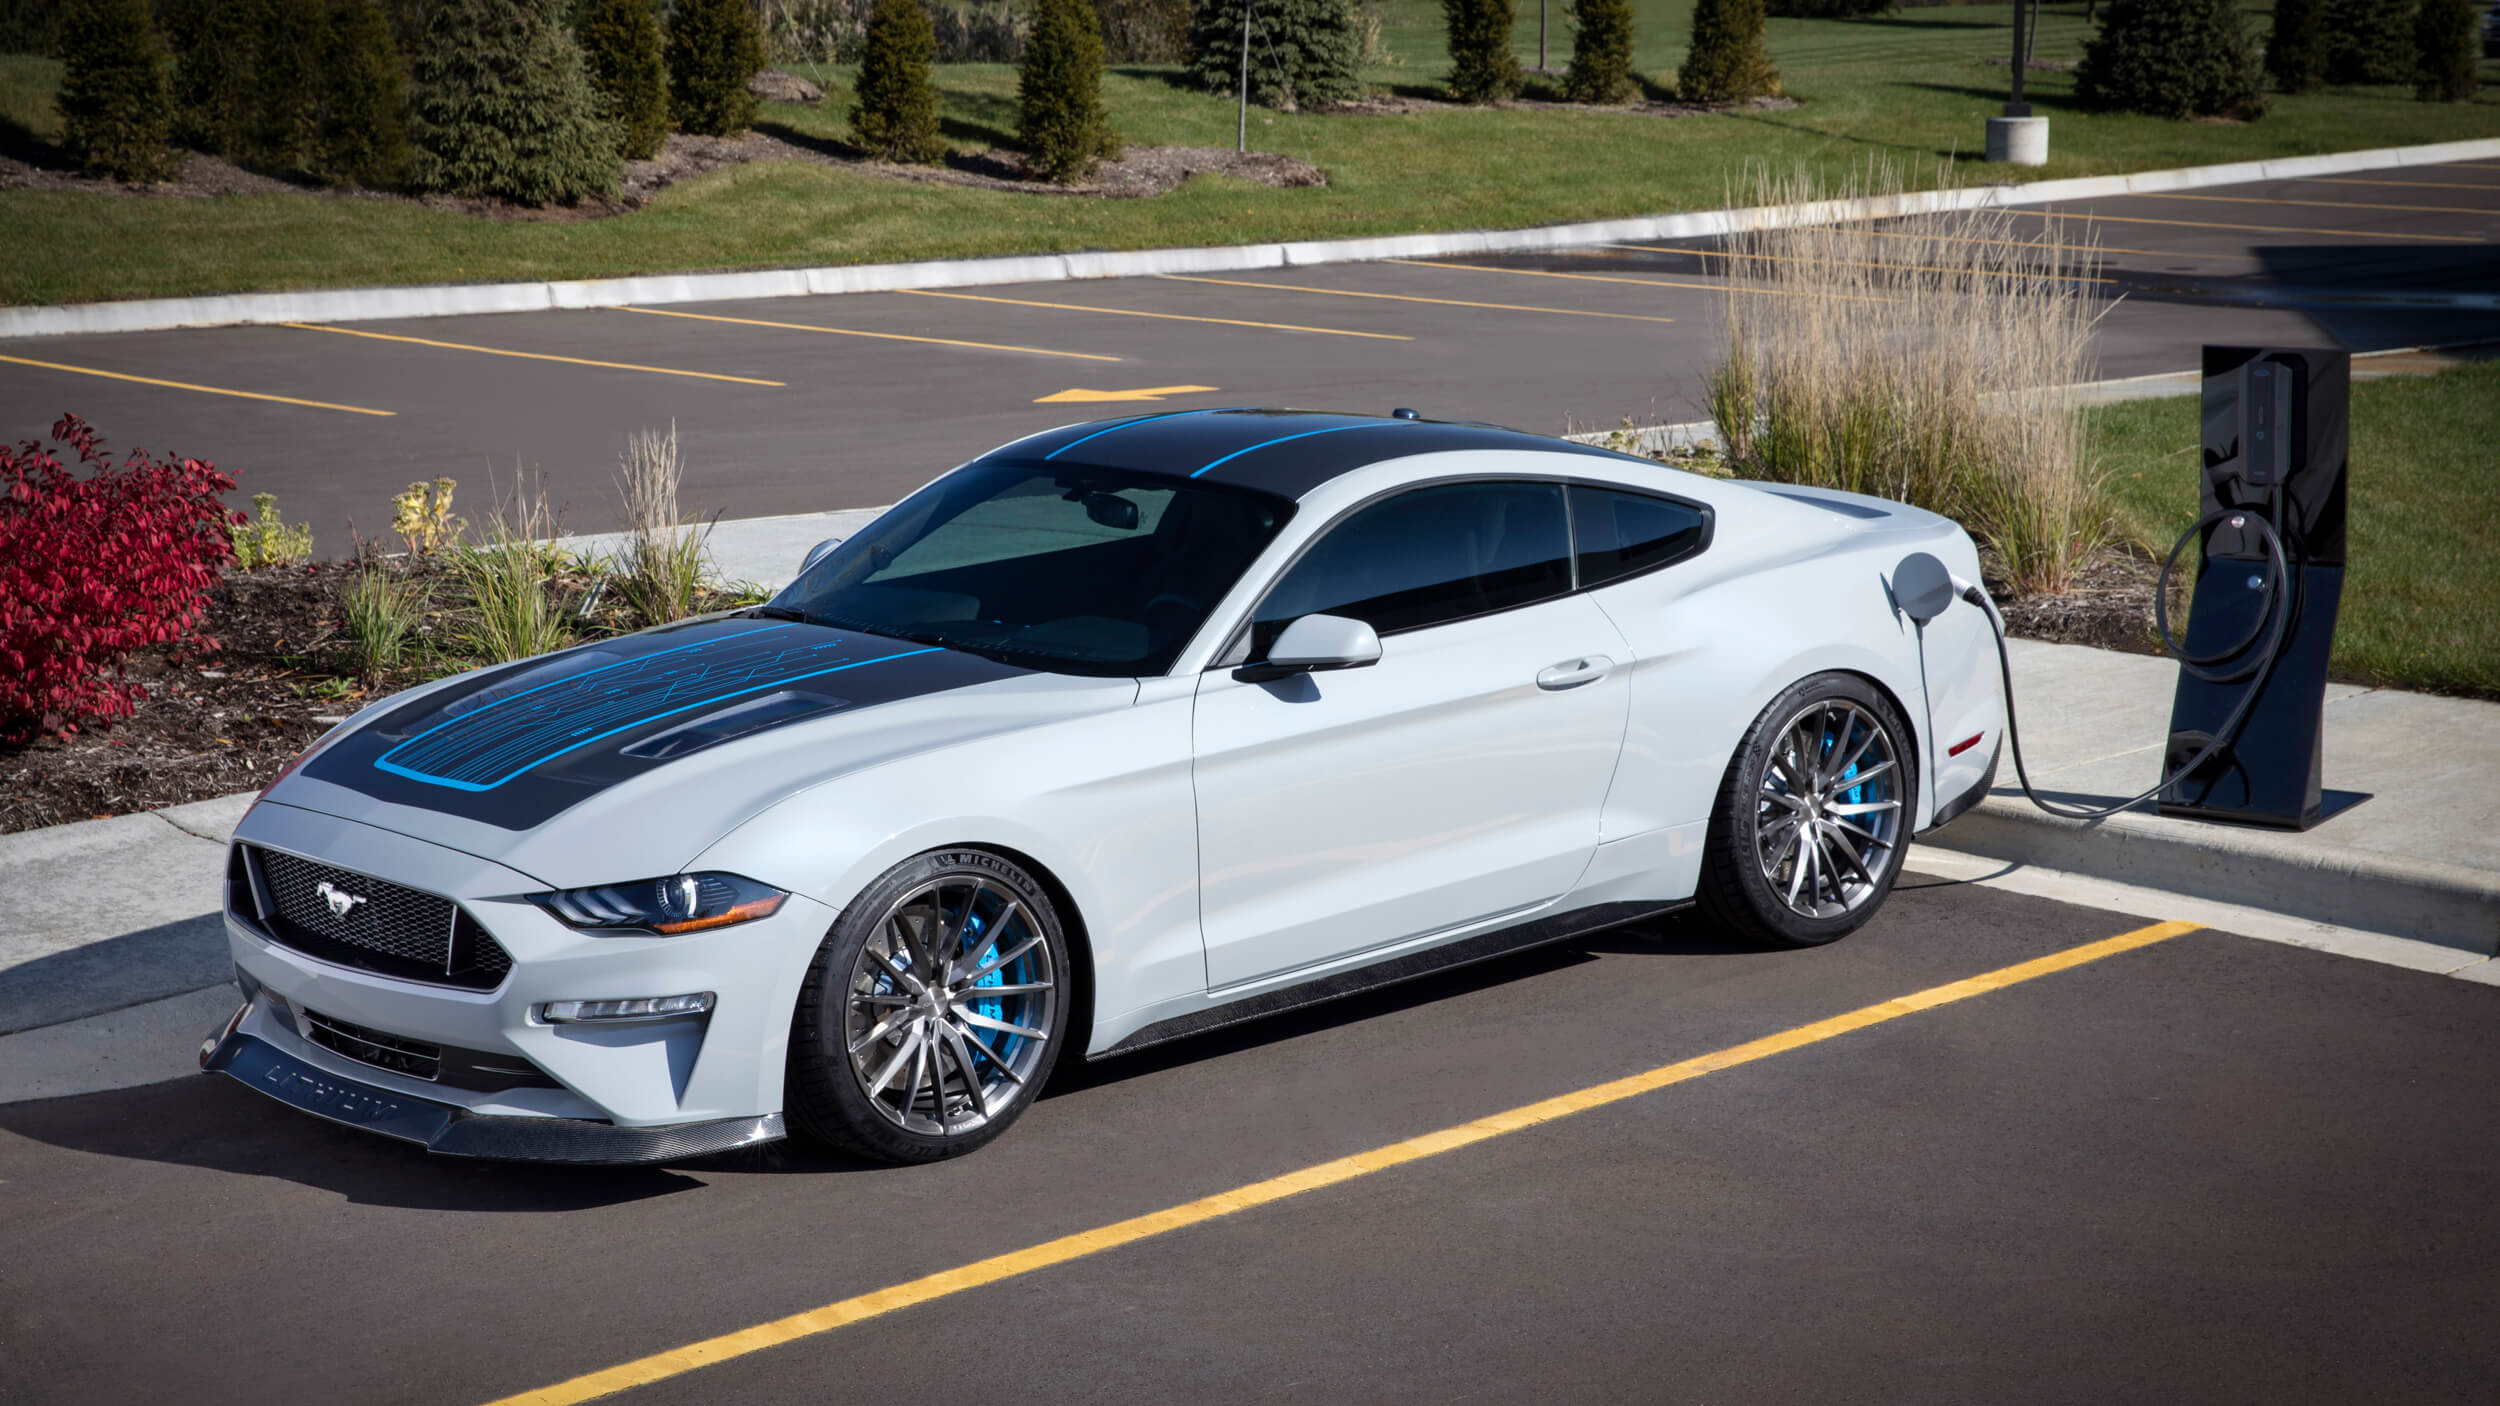 Ford makes one-off electric Mustang with 900 hp and a manual transmission